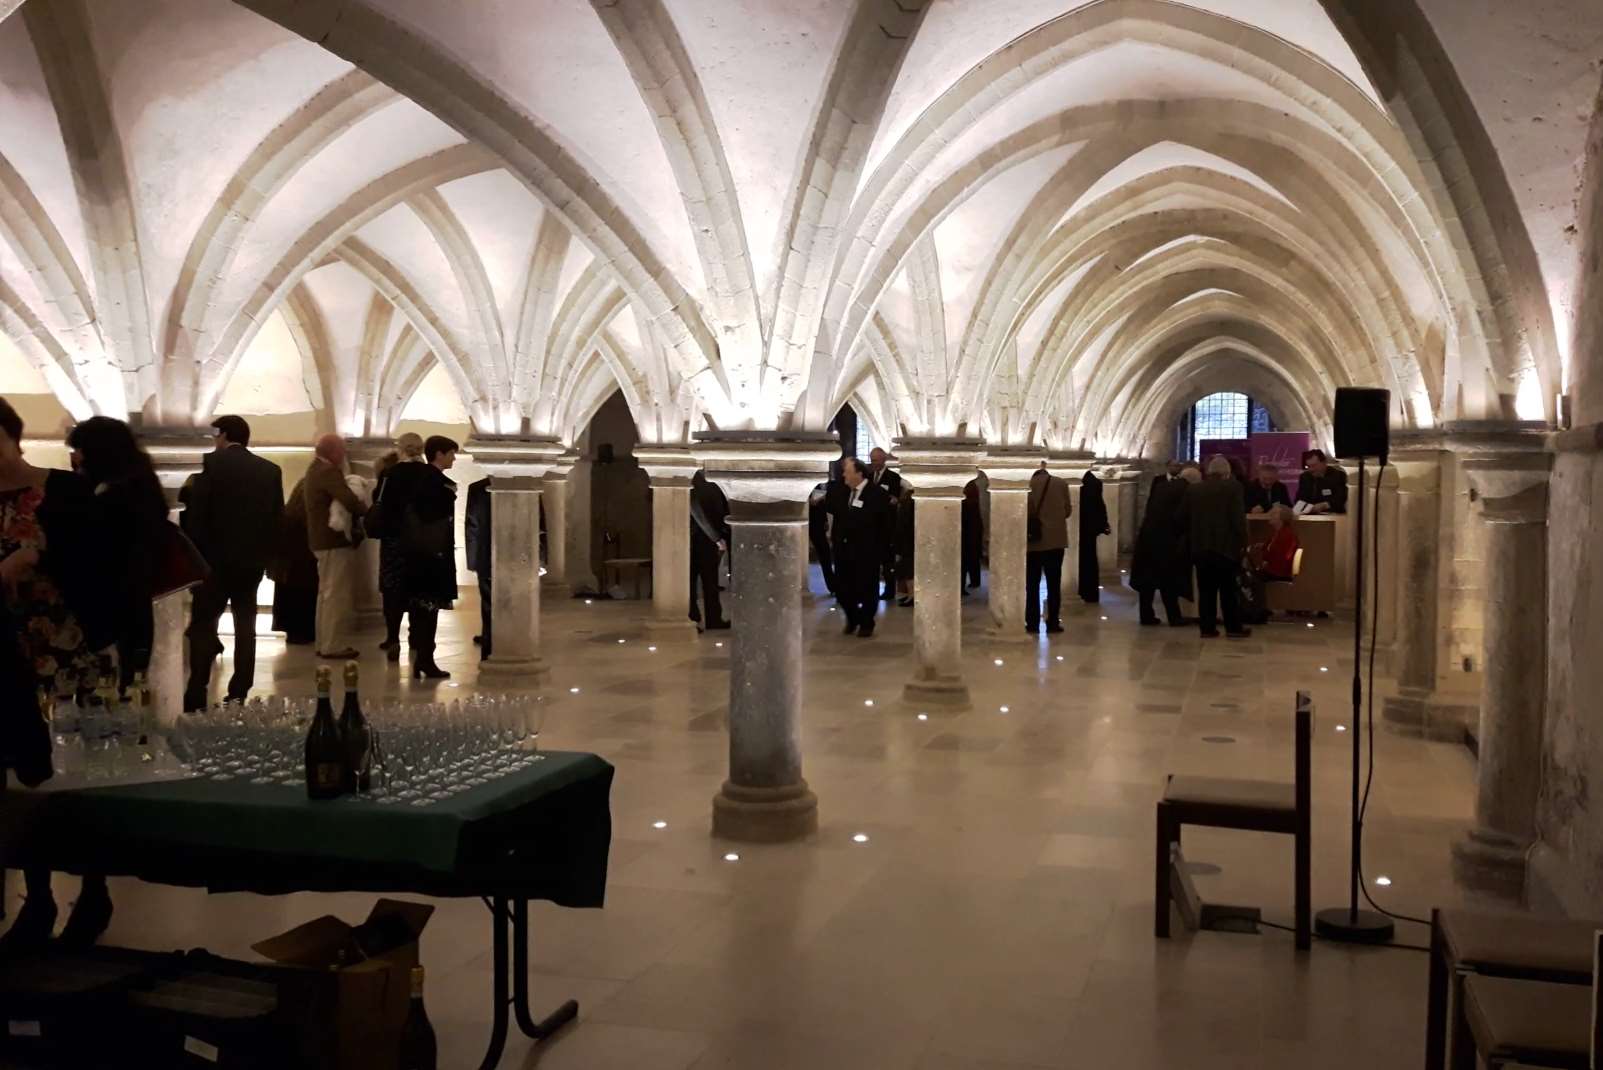 The crypt has been transformed into an exhibition space